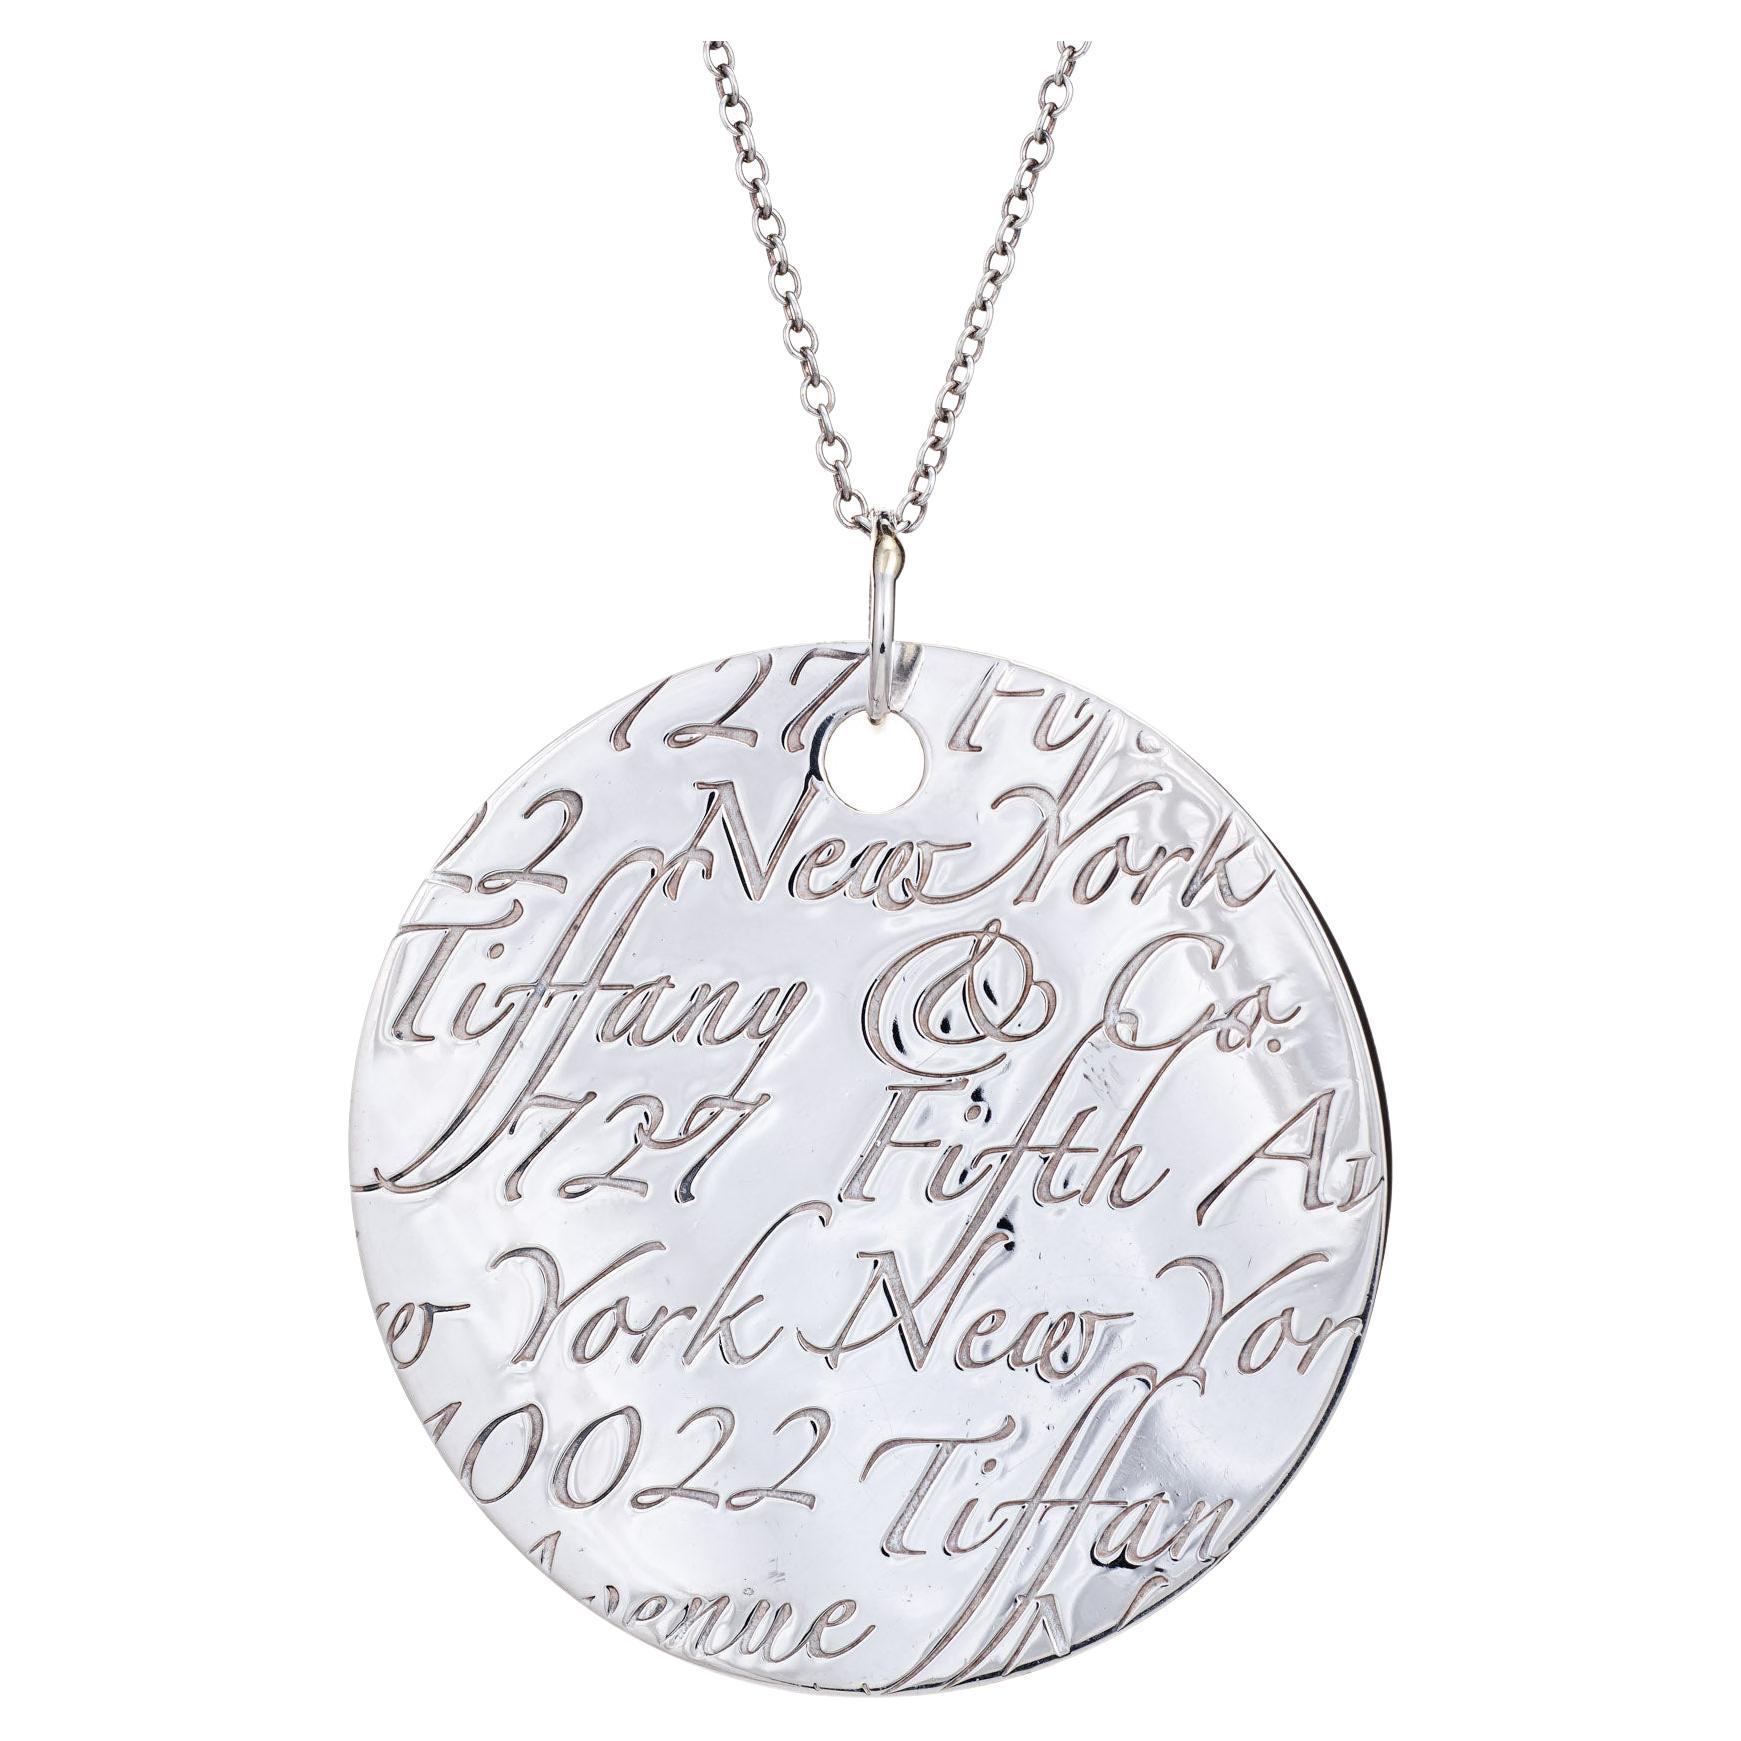 Tiffany & Co Large Jumbo Notes Necklace Silver 727 Fifth Ave New York Jewelry For Sale